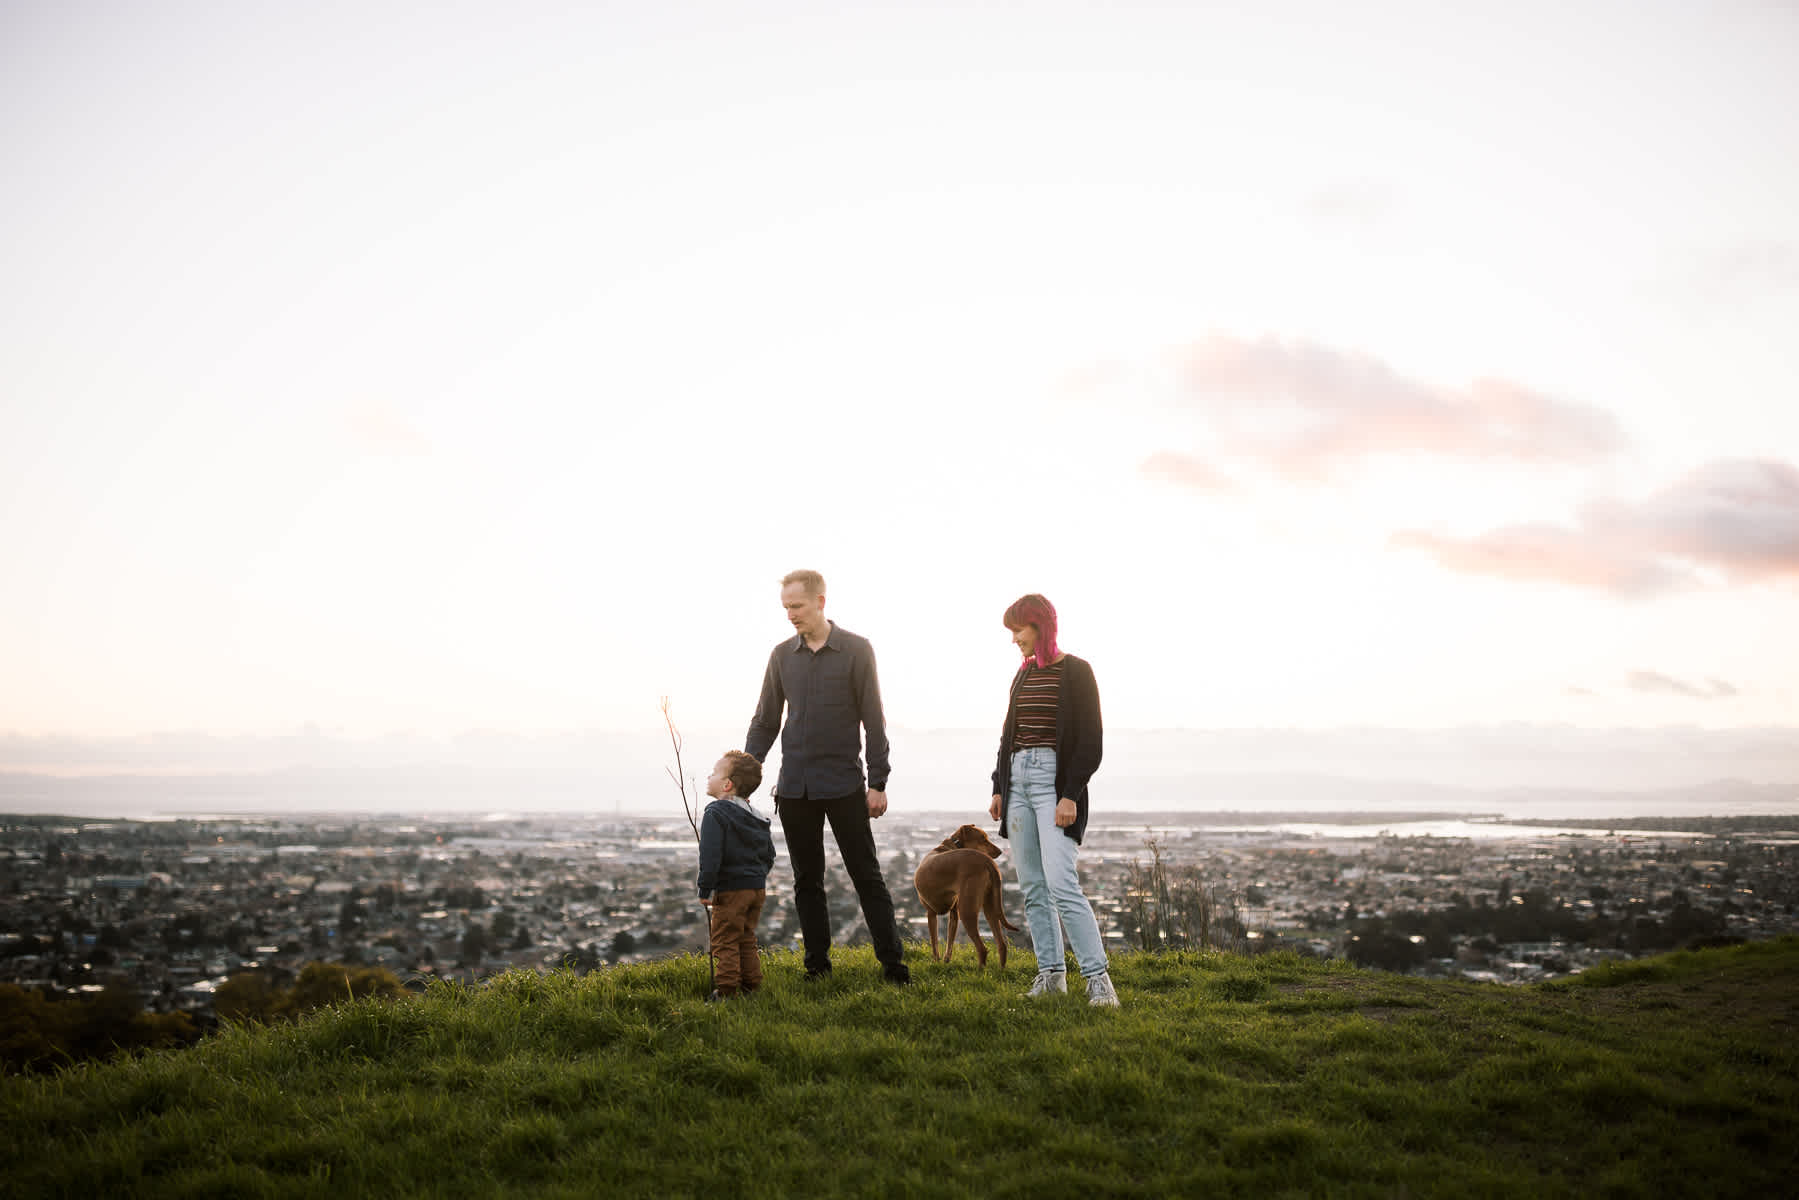 oakland-green-hills-winter-family-lifestyle-session-54